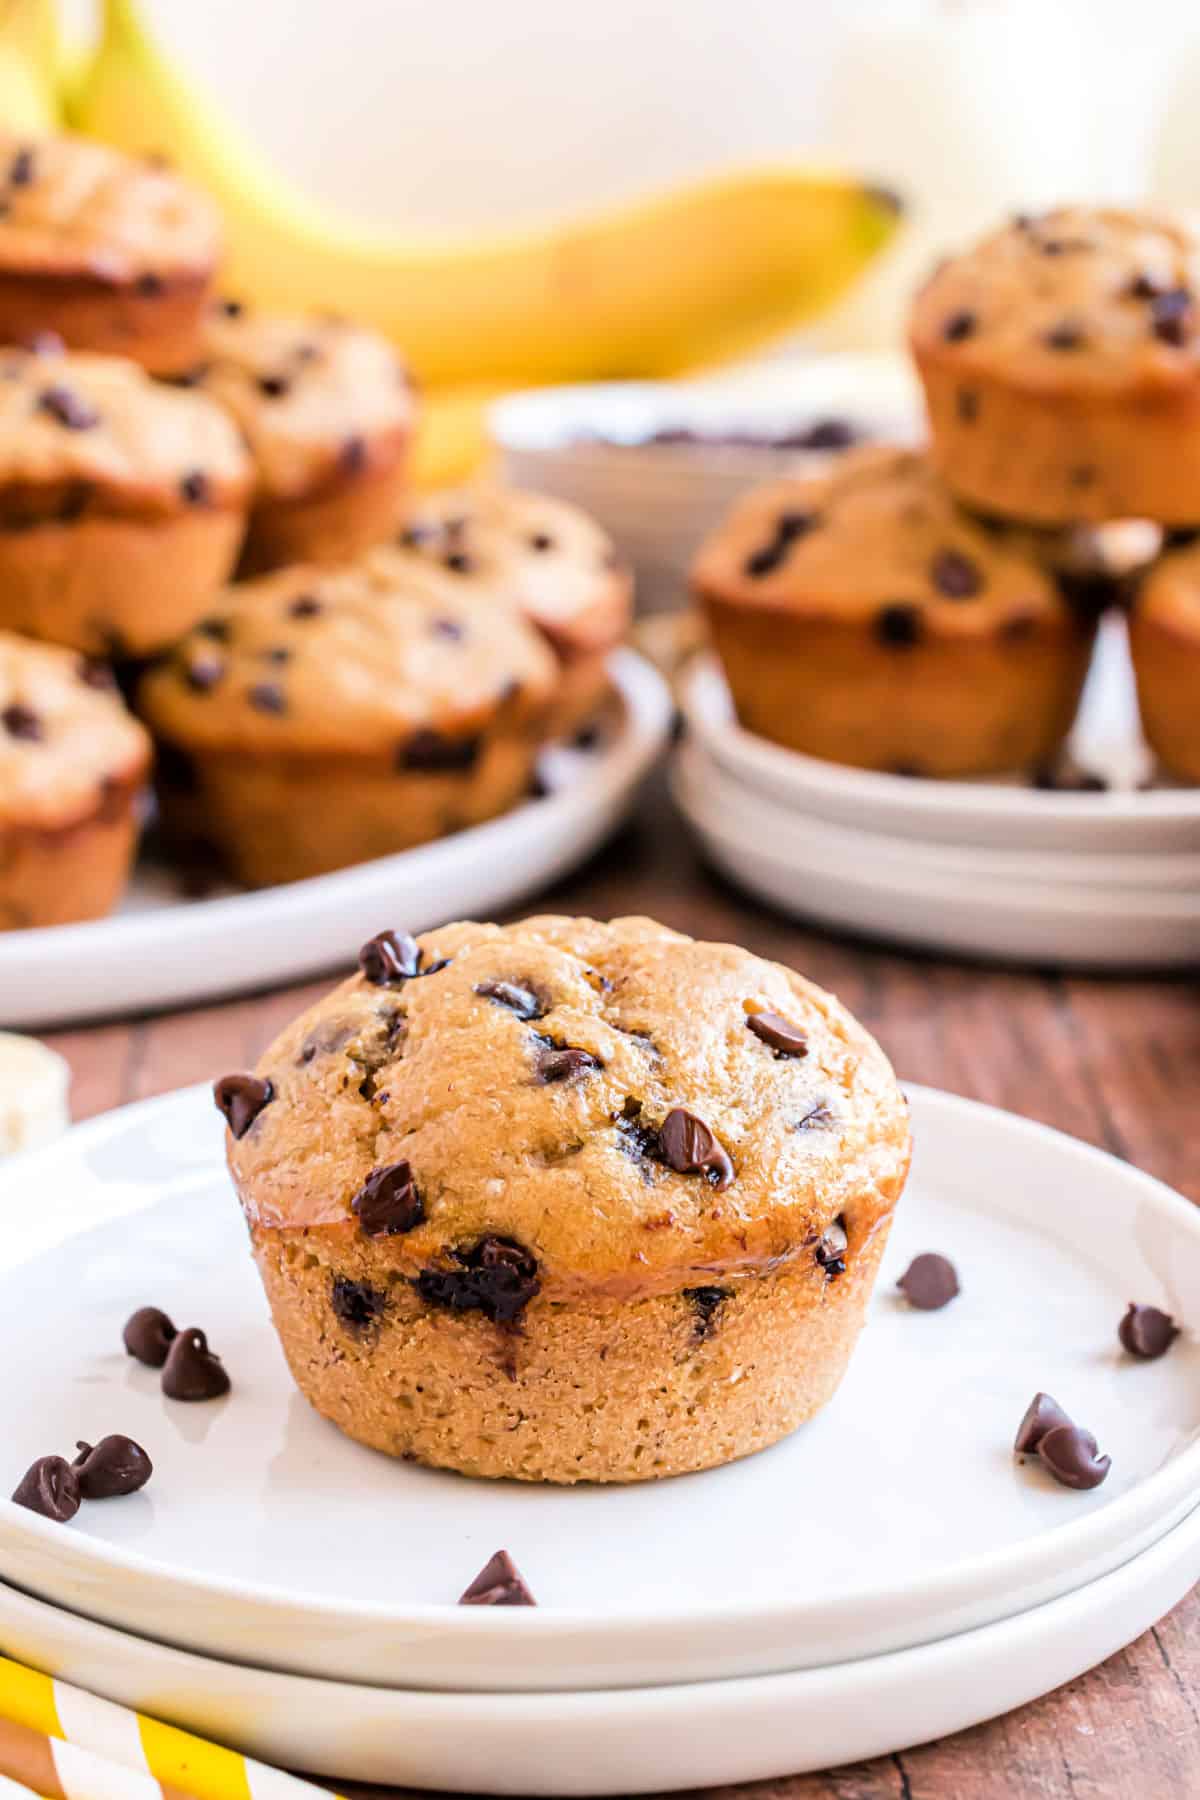 Chocolate chip muffin on a white plate.